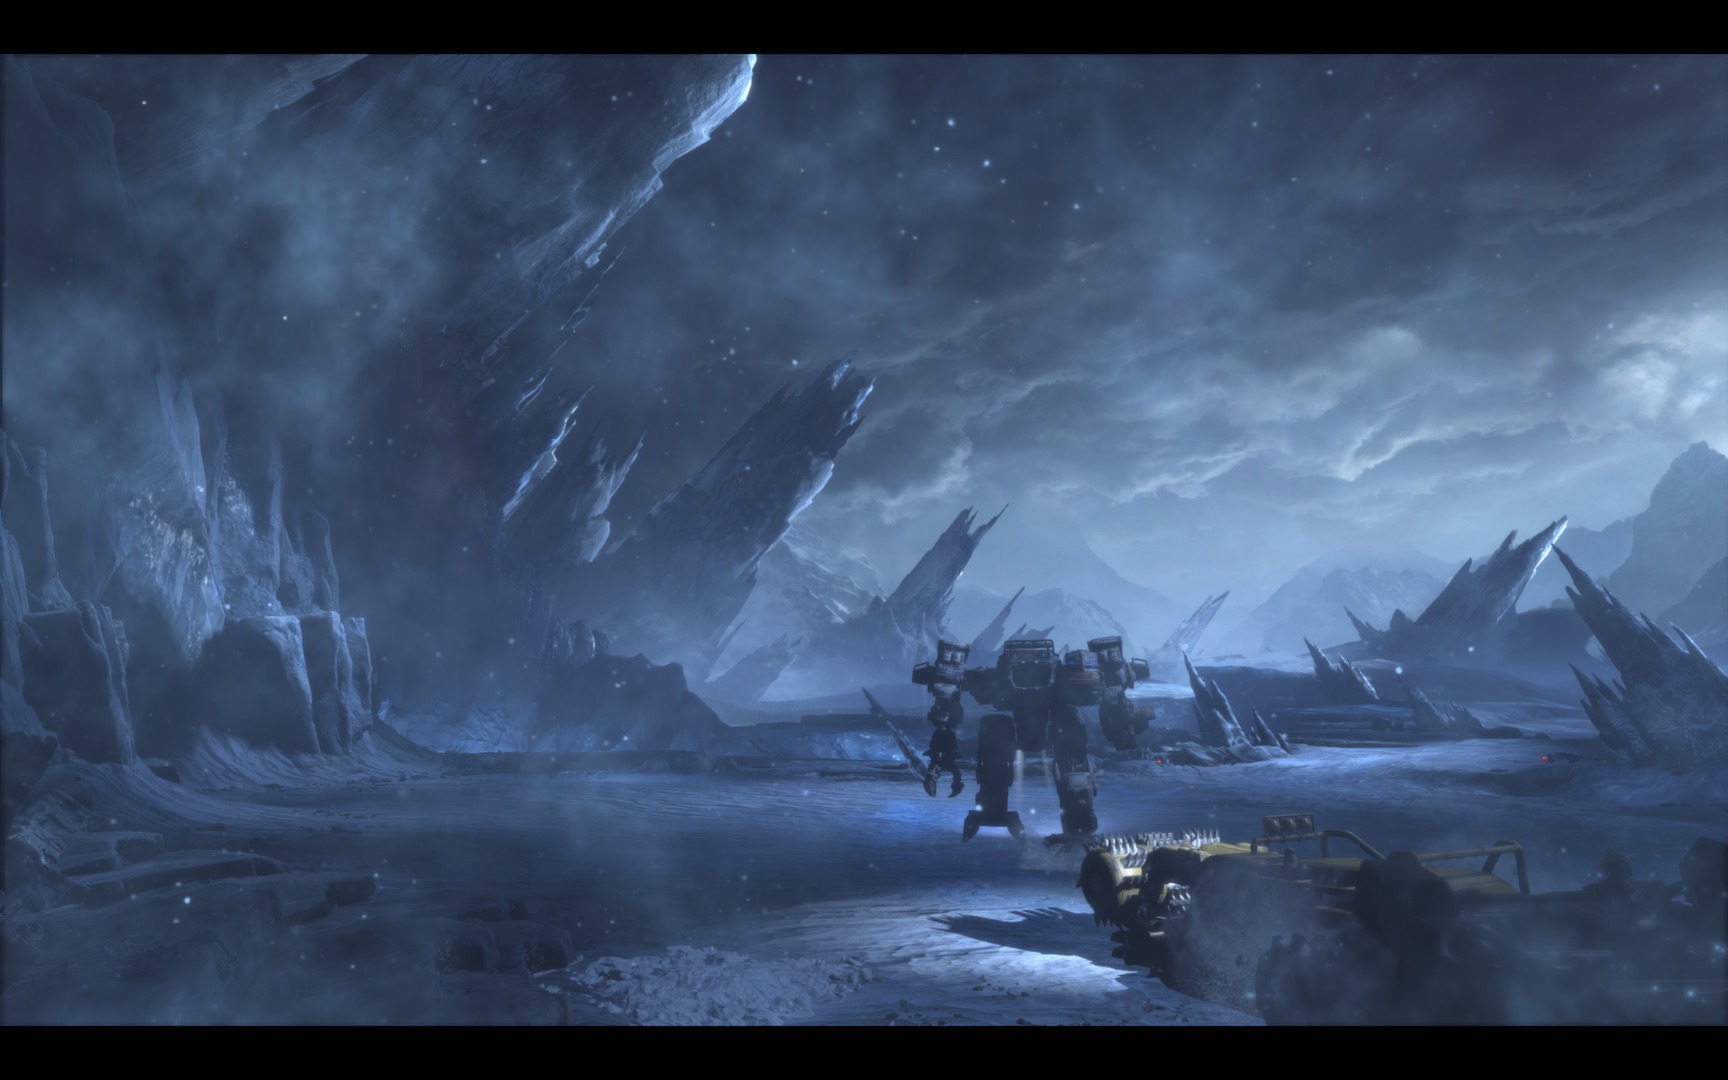 download free lost planet 3 steam